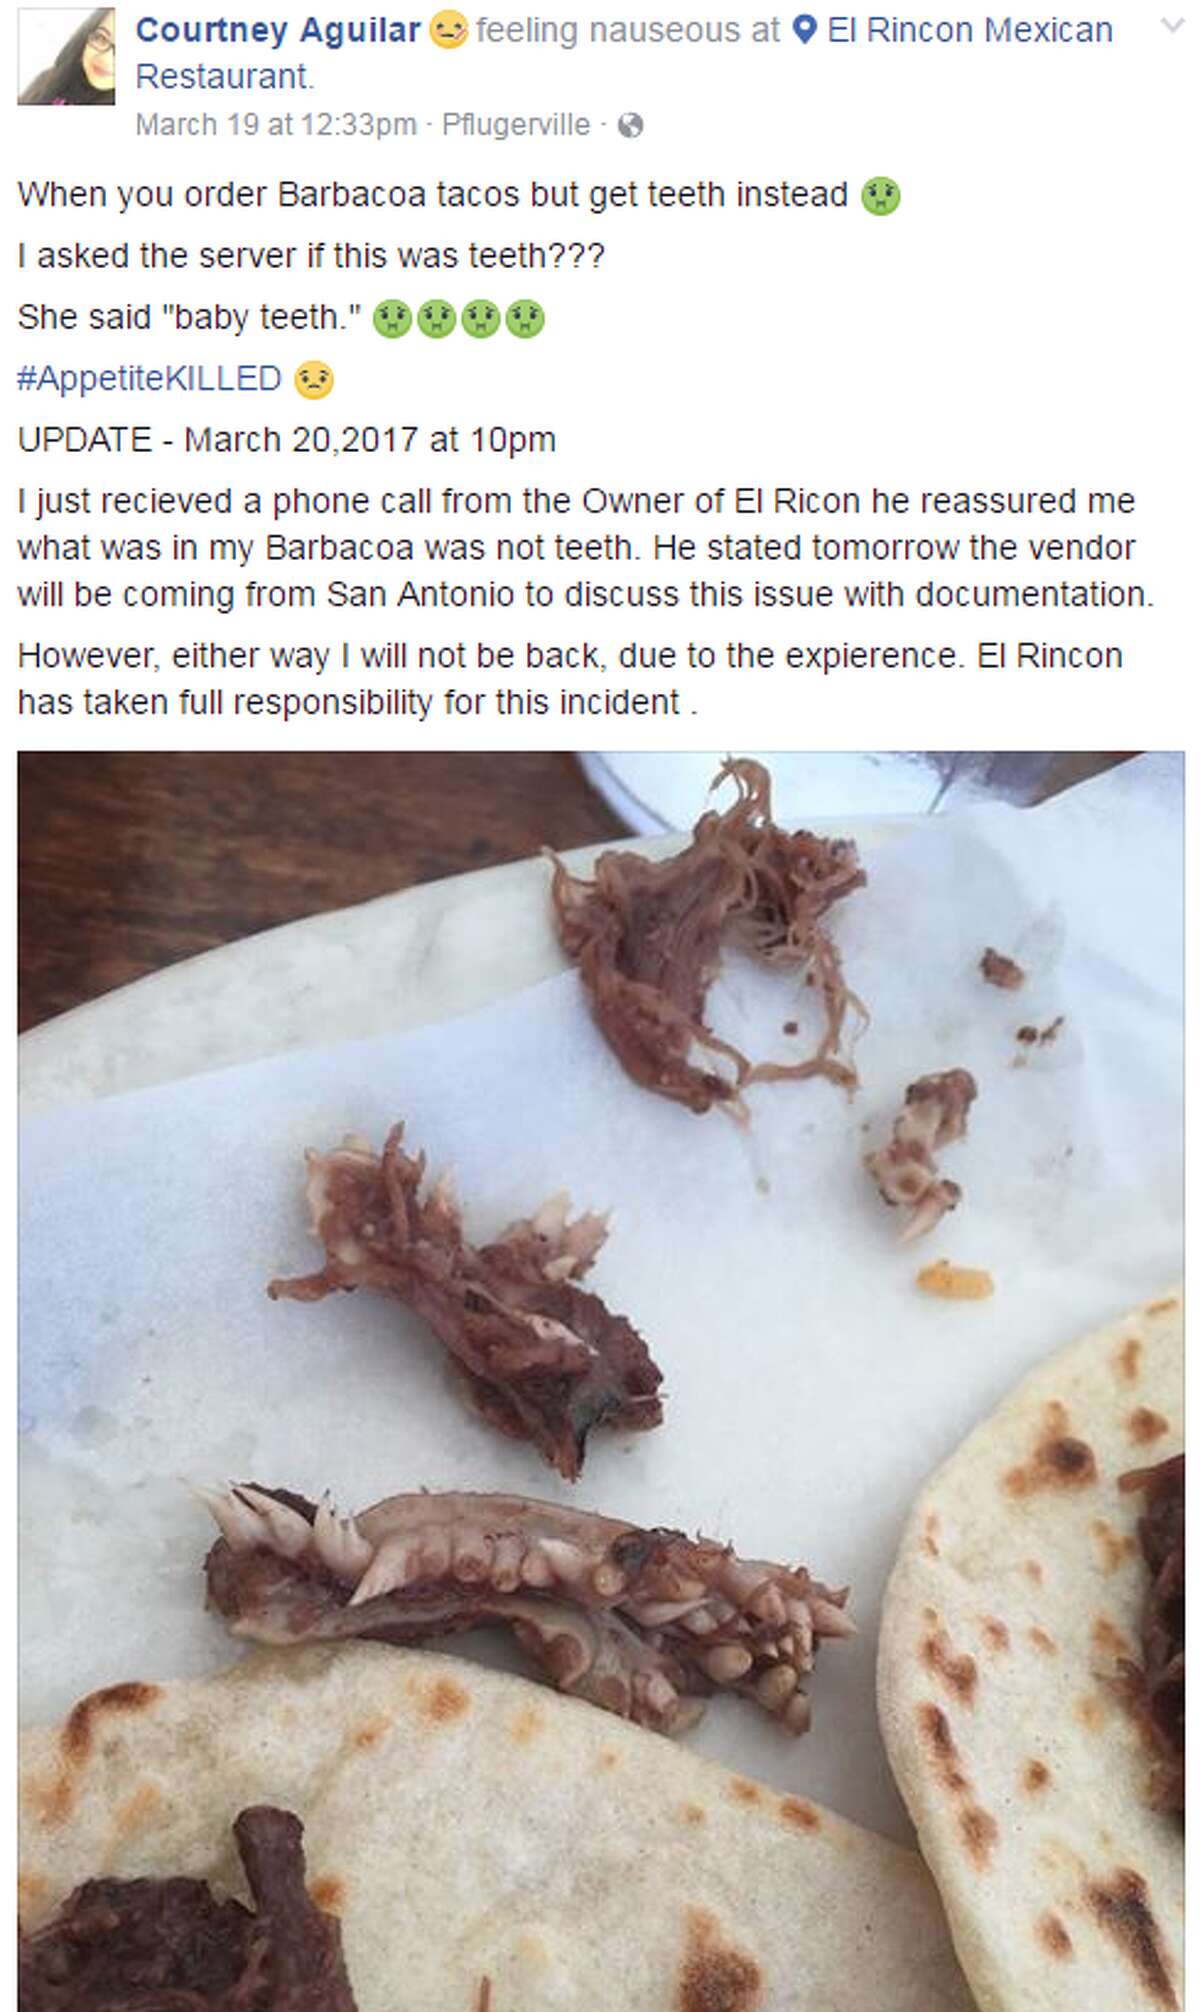 Screengrab of El Rincon Mexican Restaurant customer Courtney Aguilar's Facebook post, showing what she initially believed was "teeth" in her barbacoa taco. 